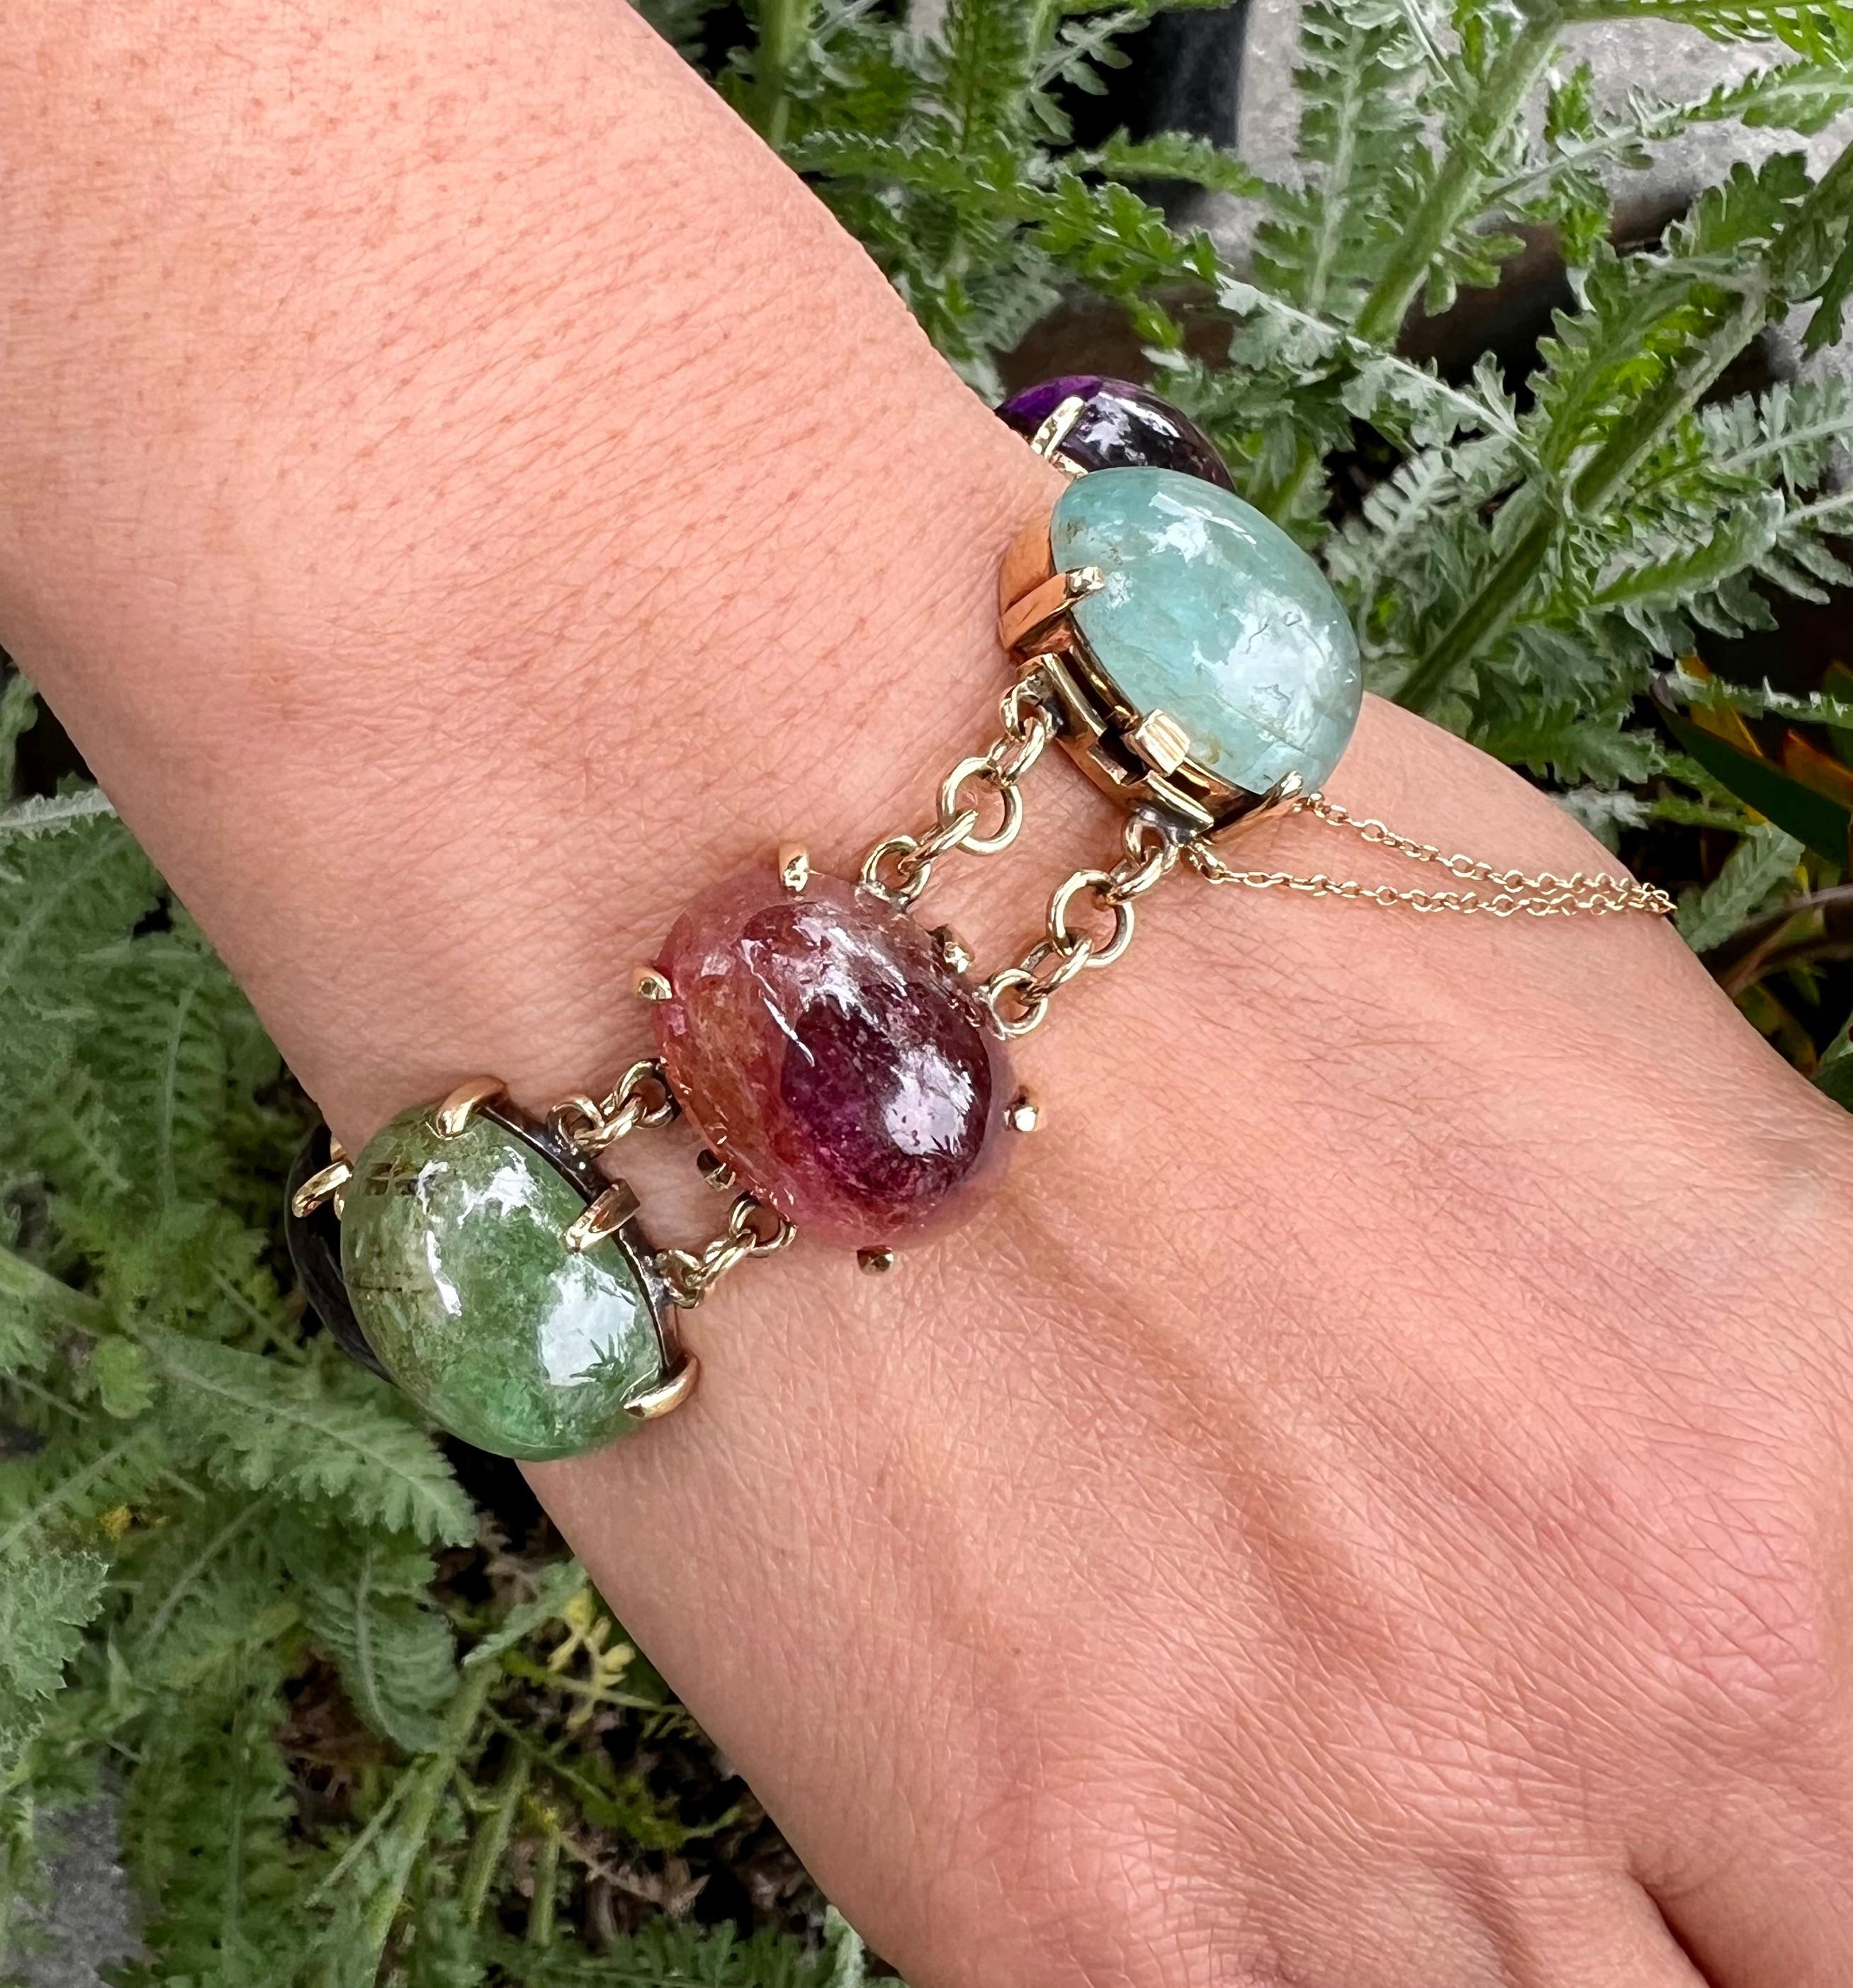 This stunning bracelet is a lovely, warm combination of natural stones consisting of watery Aquamarine, Amethyst, Topaz, Green Tourmaline and Sapphires set in 14 karat gold. It is very comfortable to wear and has a secure clasp with a safety chain.